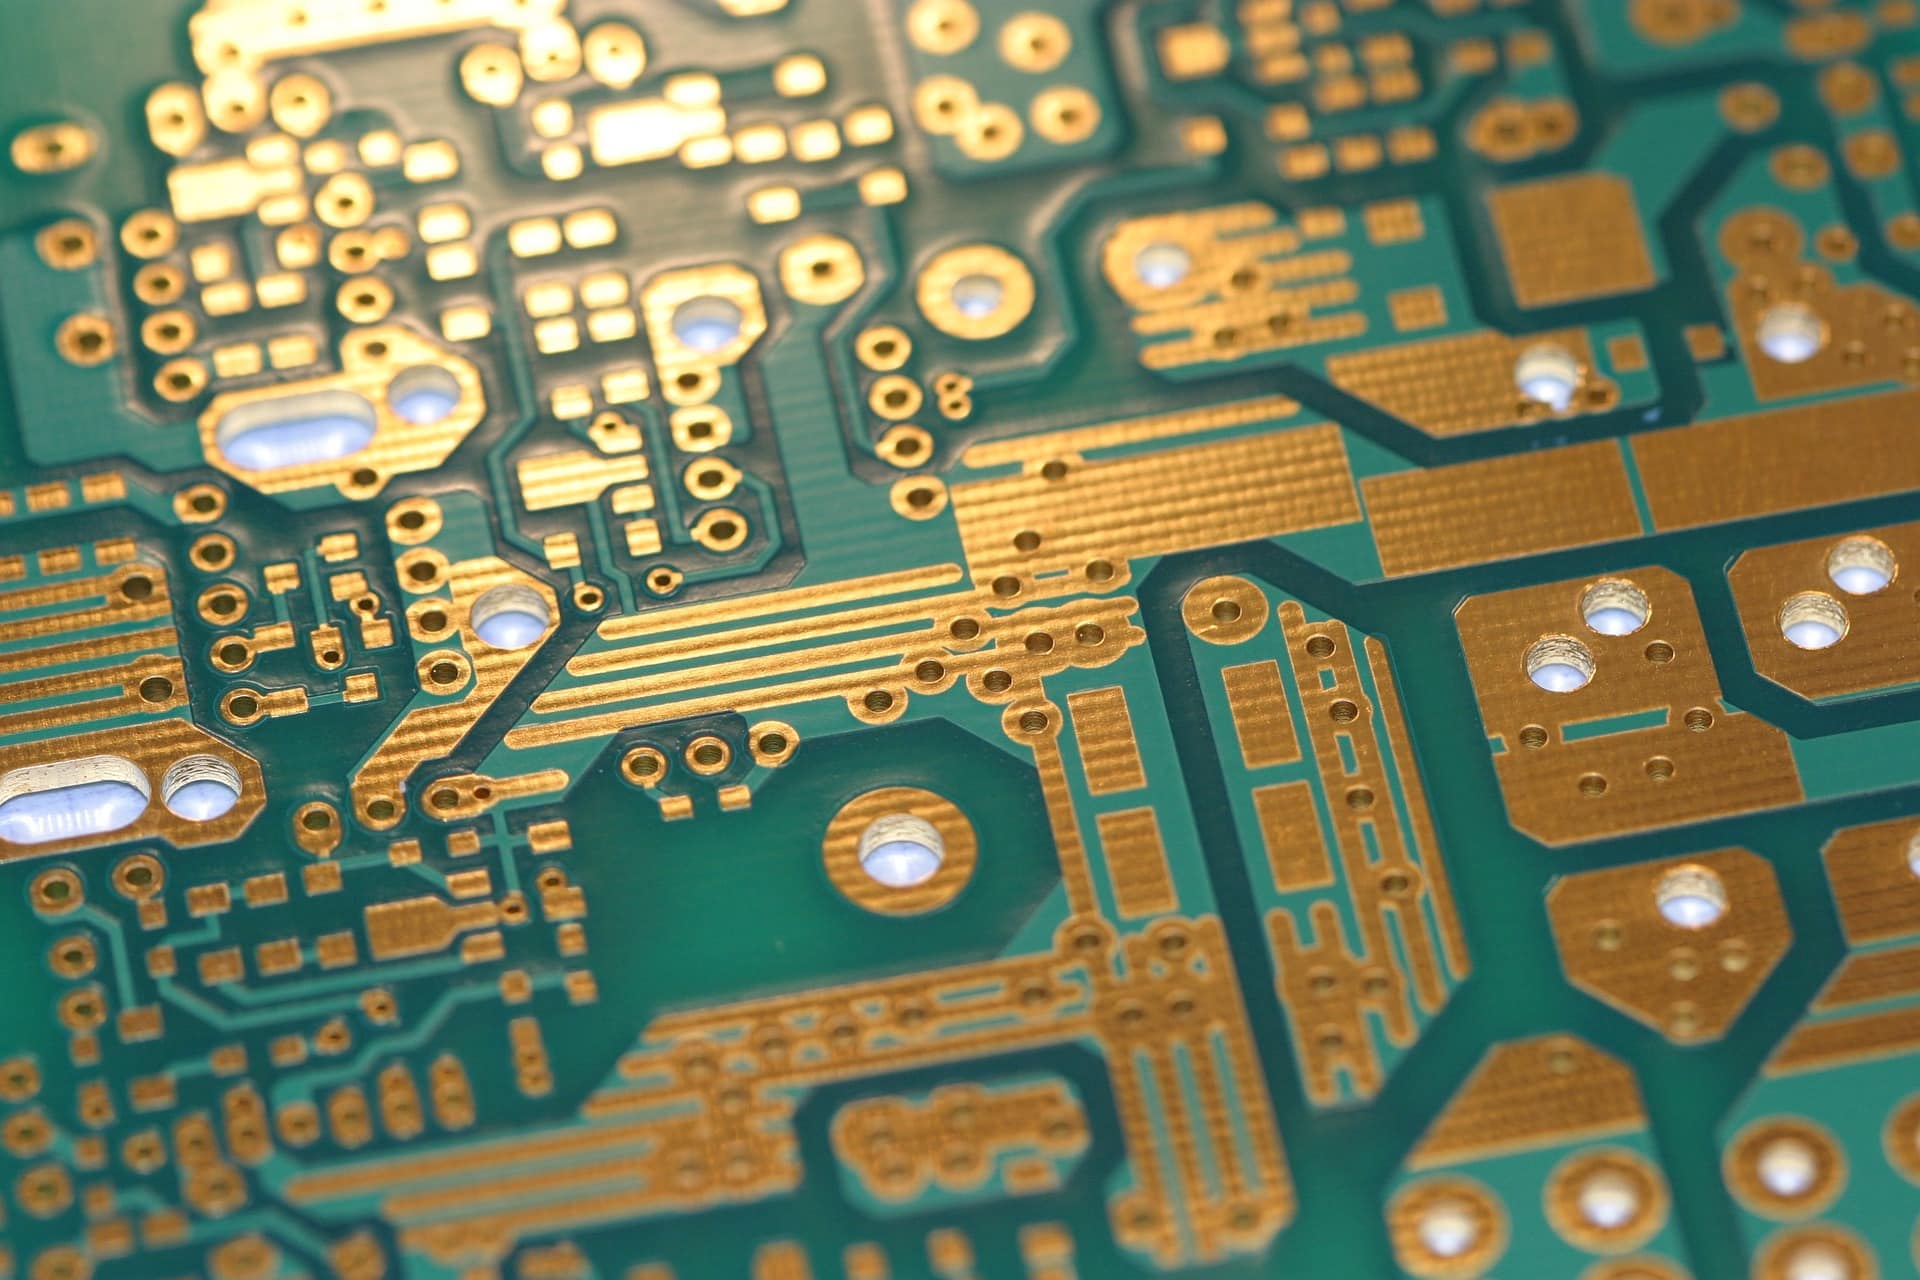           The role of metal core PCB in the Led industry